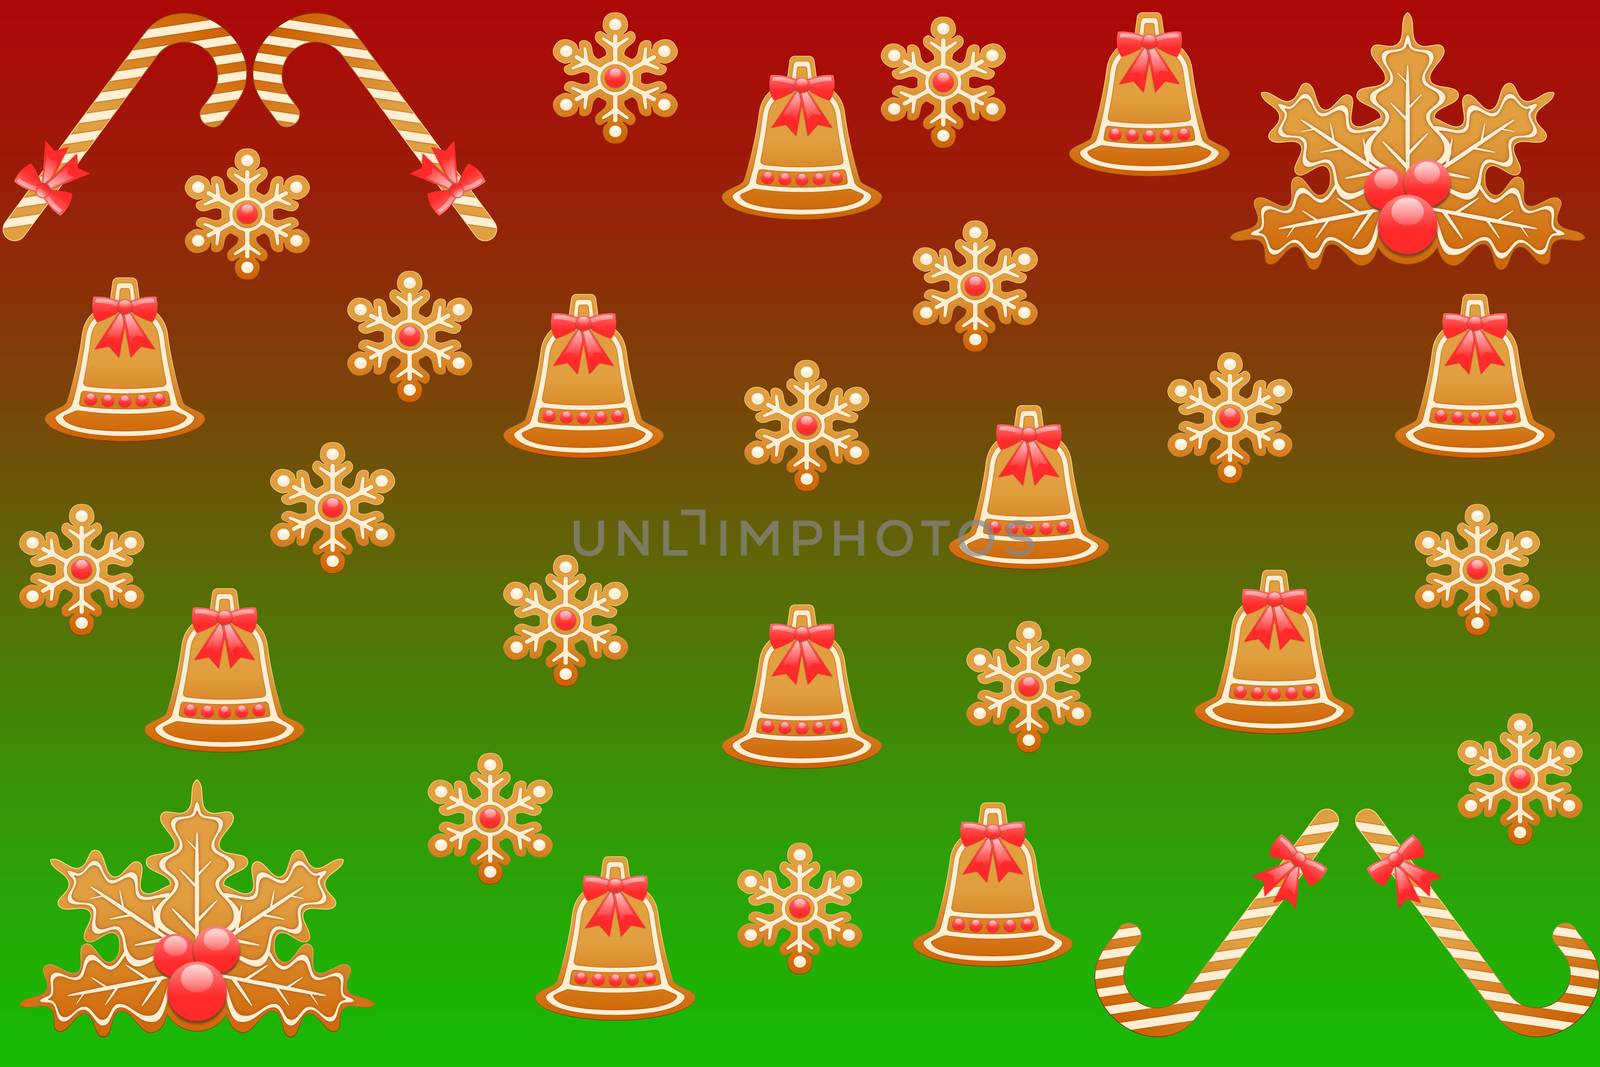 Merry christmas santa claus present wrapping paper gingerbread design pattern on a gradient green and red background by charlottebleijenberg